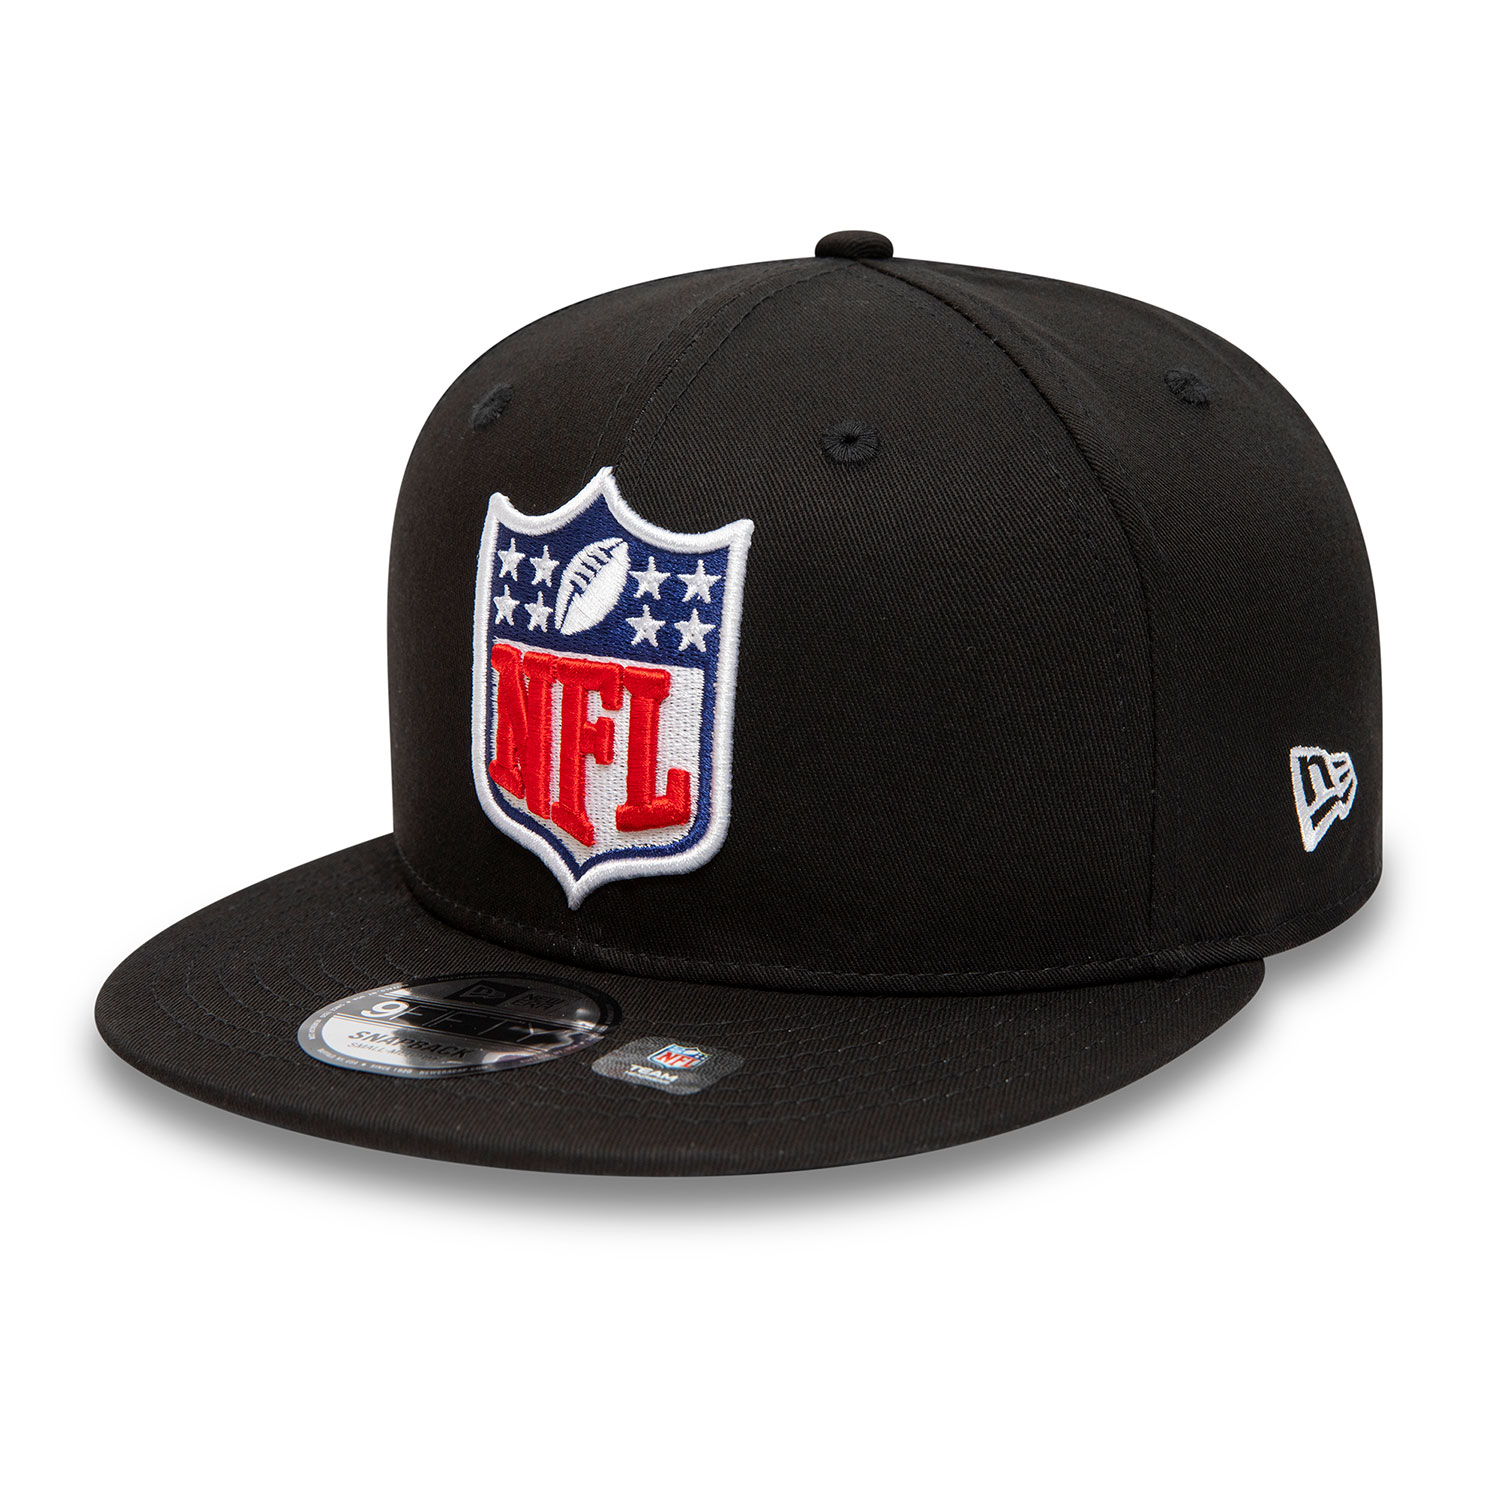 nfl logo fitted hat